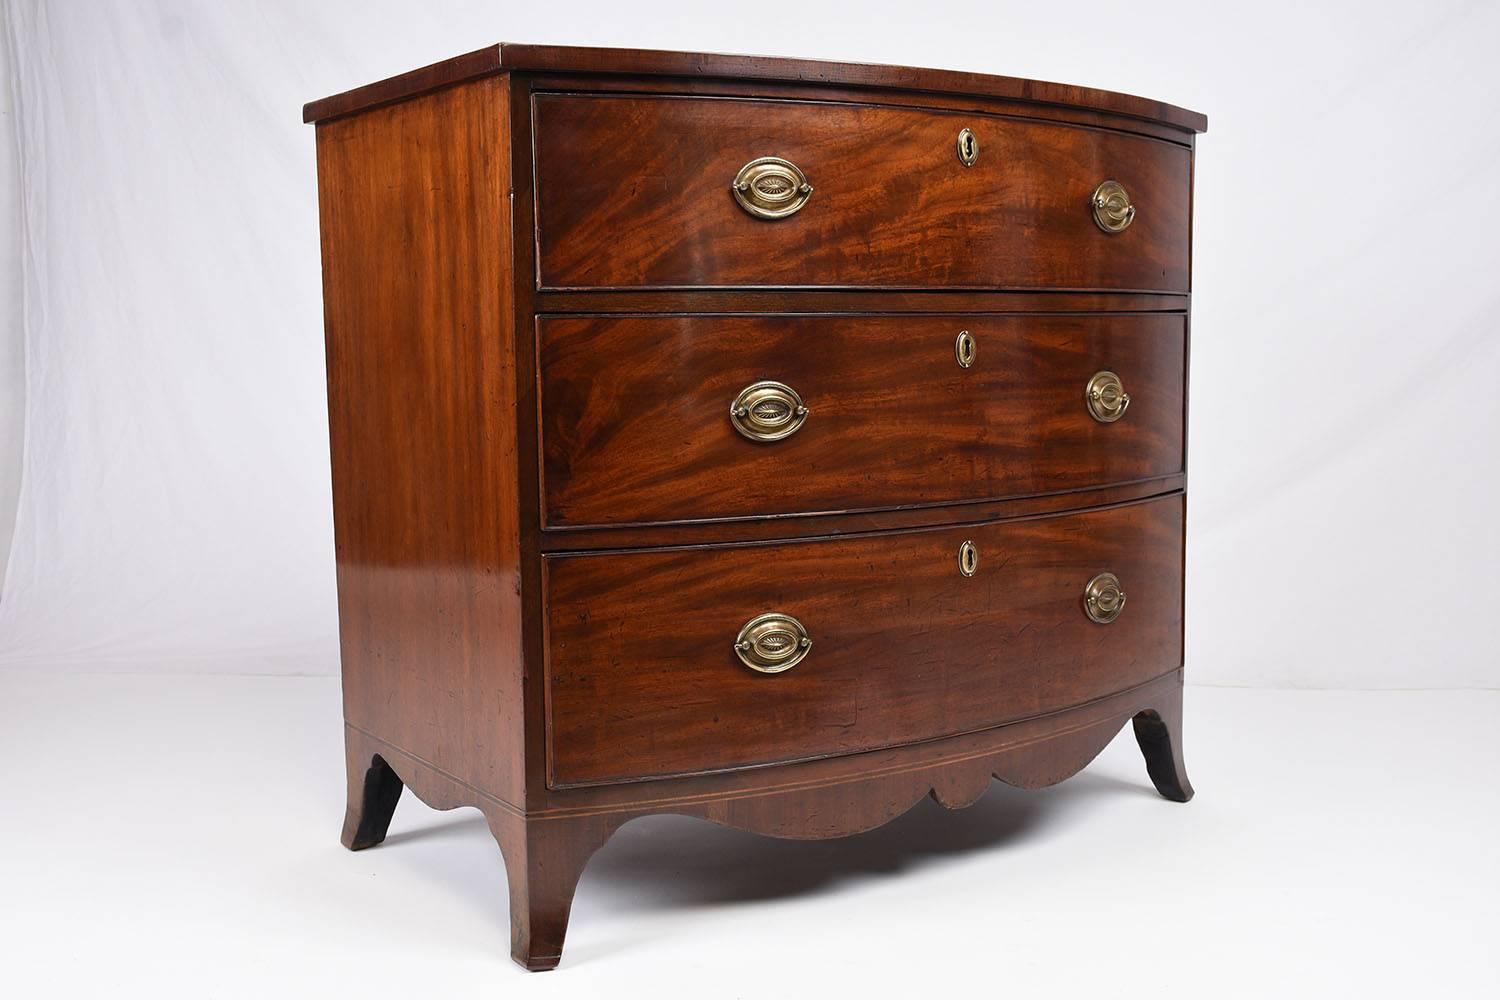 This 1870s antique George III style chest is made of mahogany wood with its original mahogany color stain finish. The top of the chest features a delicate inlaid design border. There are three drawers adorned with two decorative brass drawer pulls